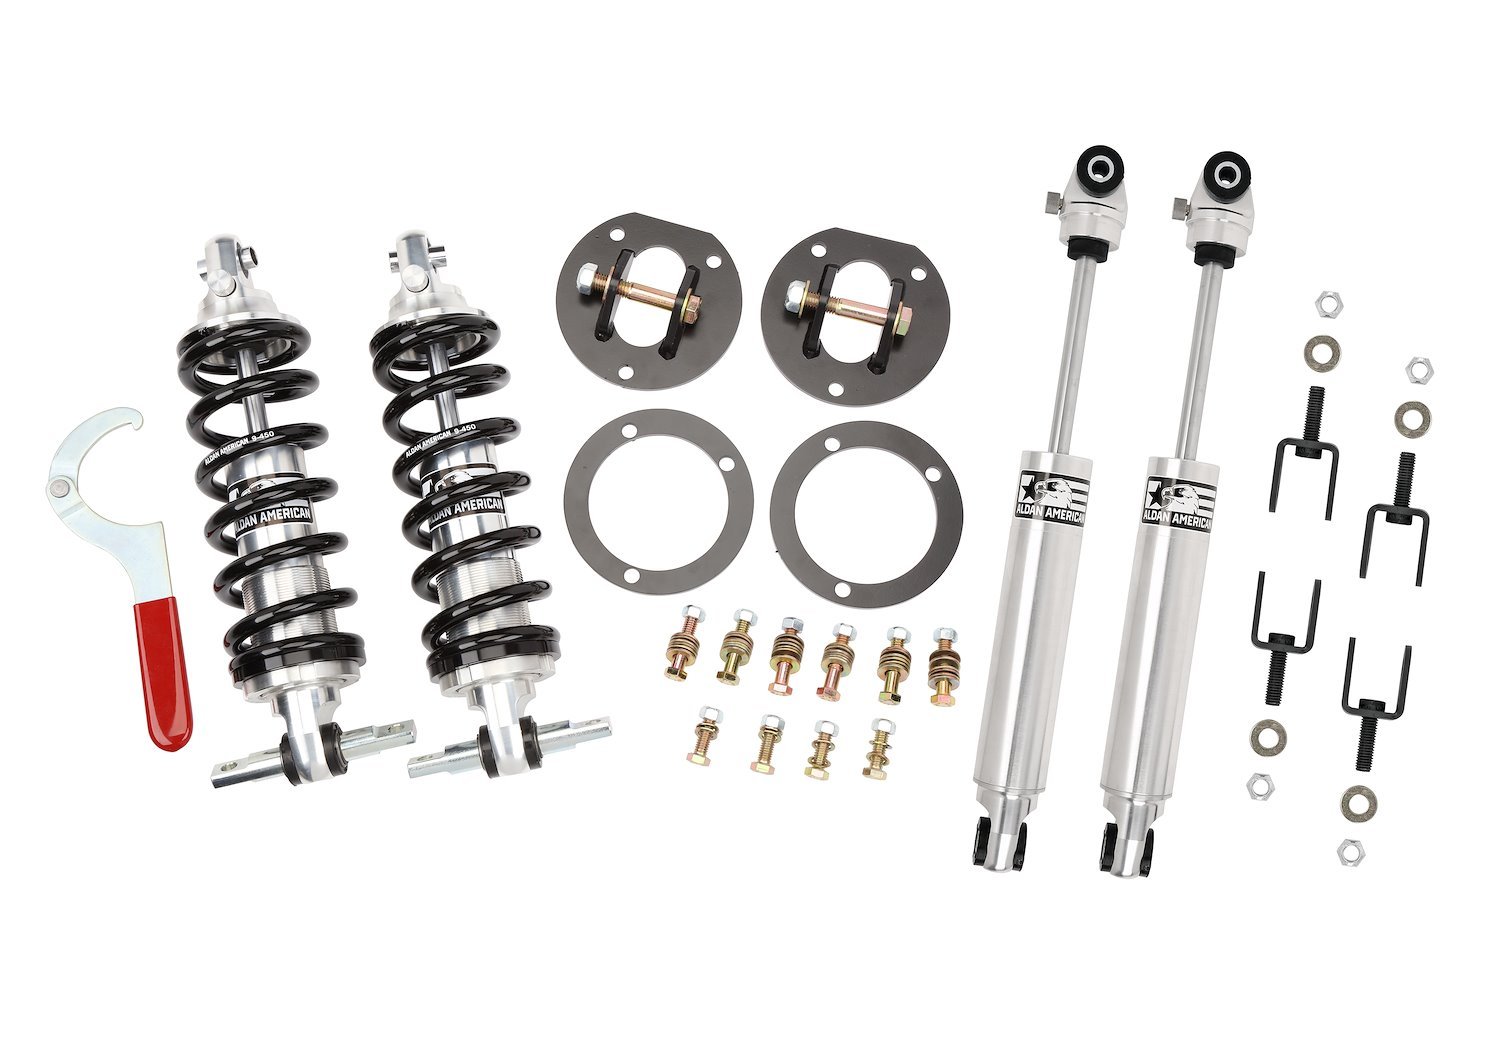 Road Comp Suspension Package Fits Select 1960-1973 Ford, Mercury Models [Small Block, 450 lb. Springs]